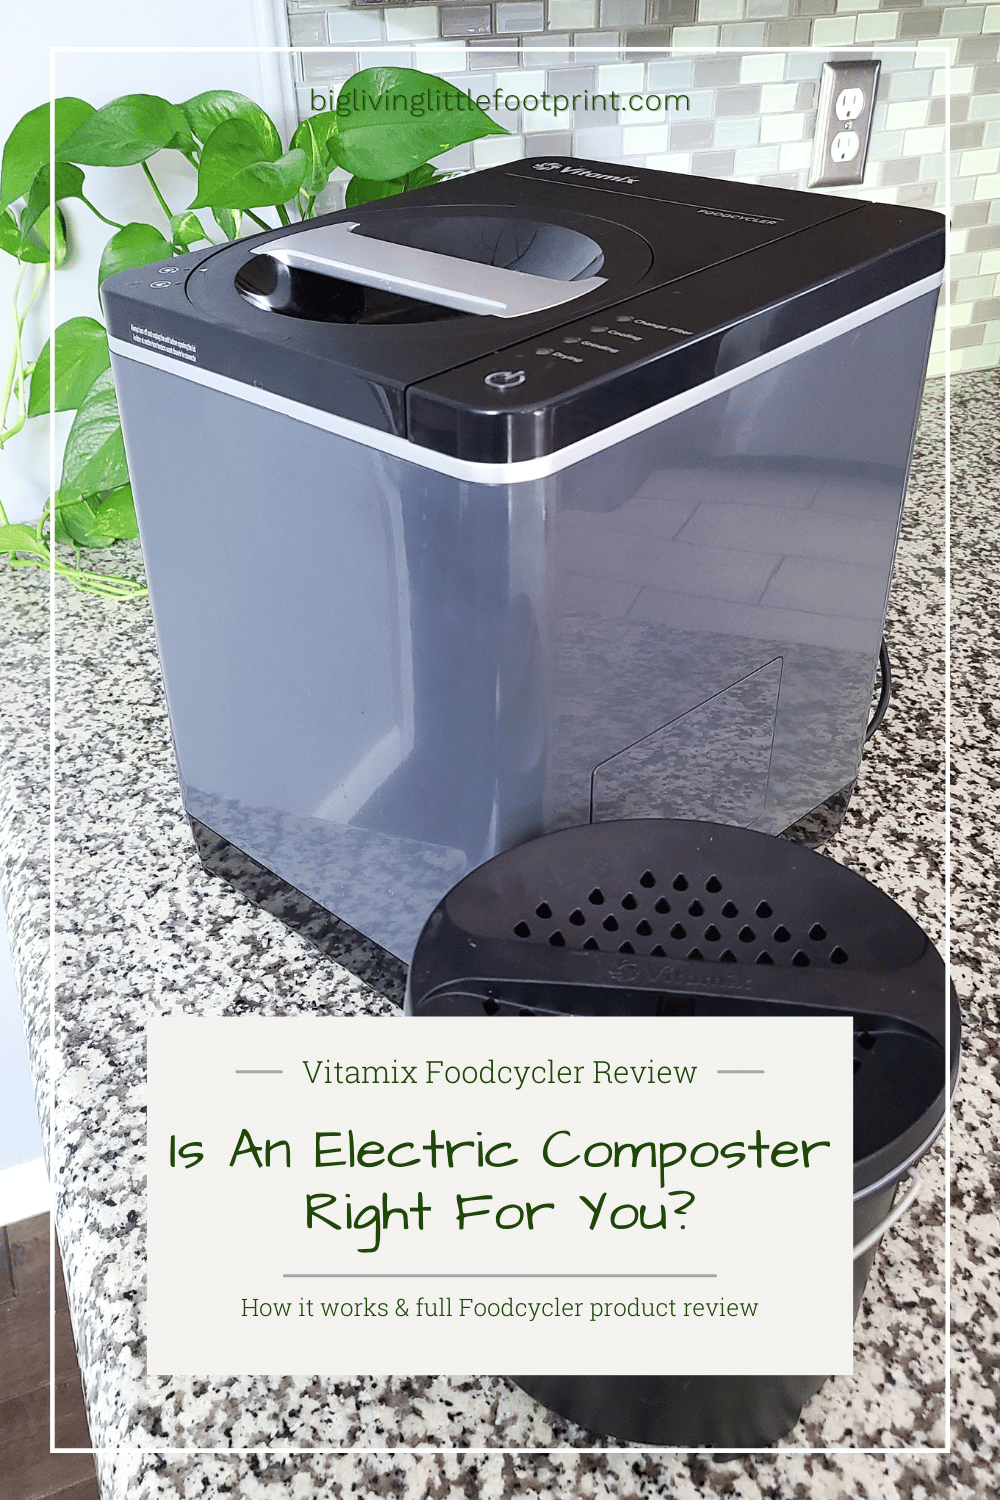 Is An Electric Composter Right For You? – Honest Vitamix Foodcycler Review